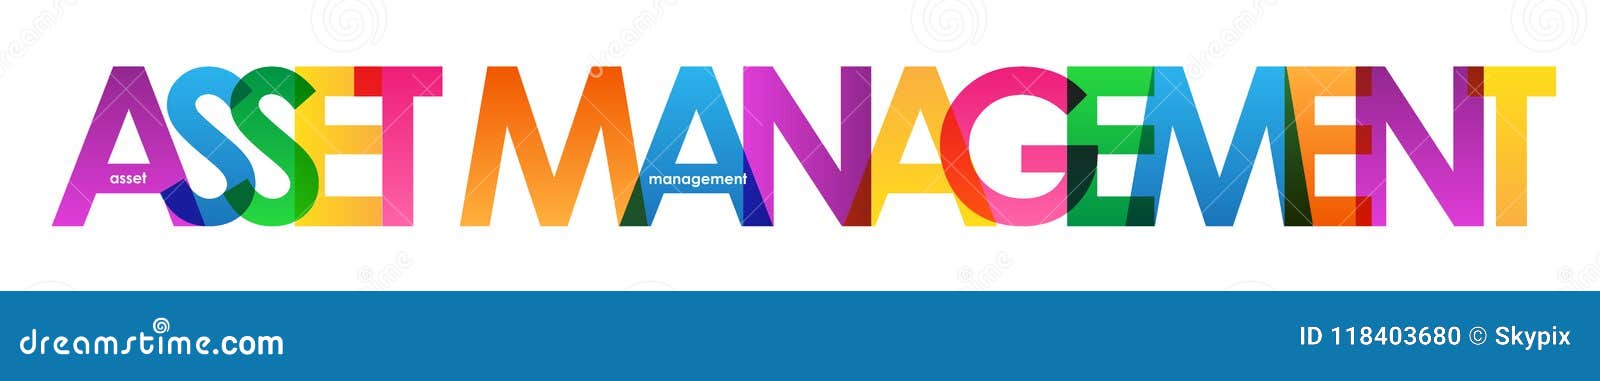 asset management colorful overlapping letters banner